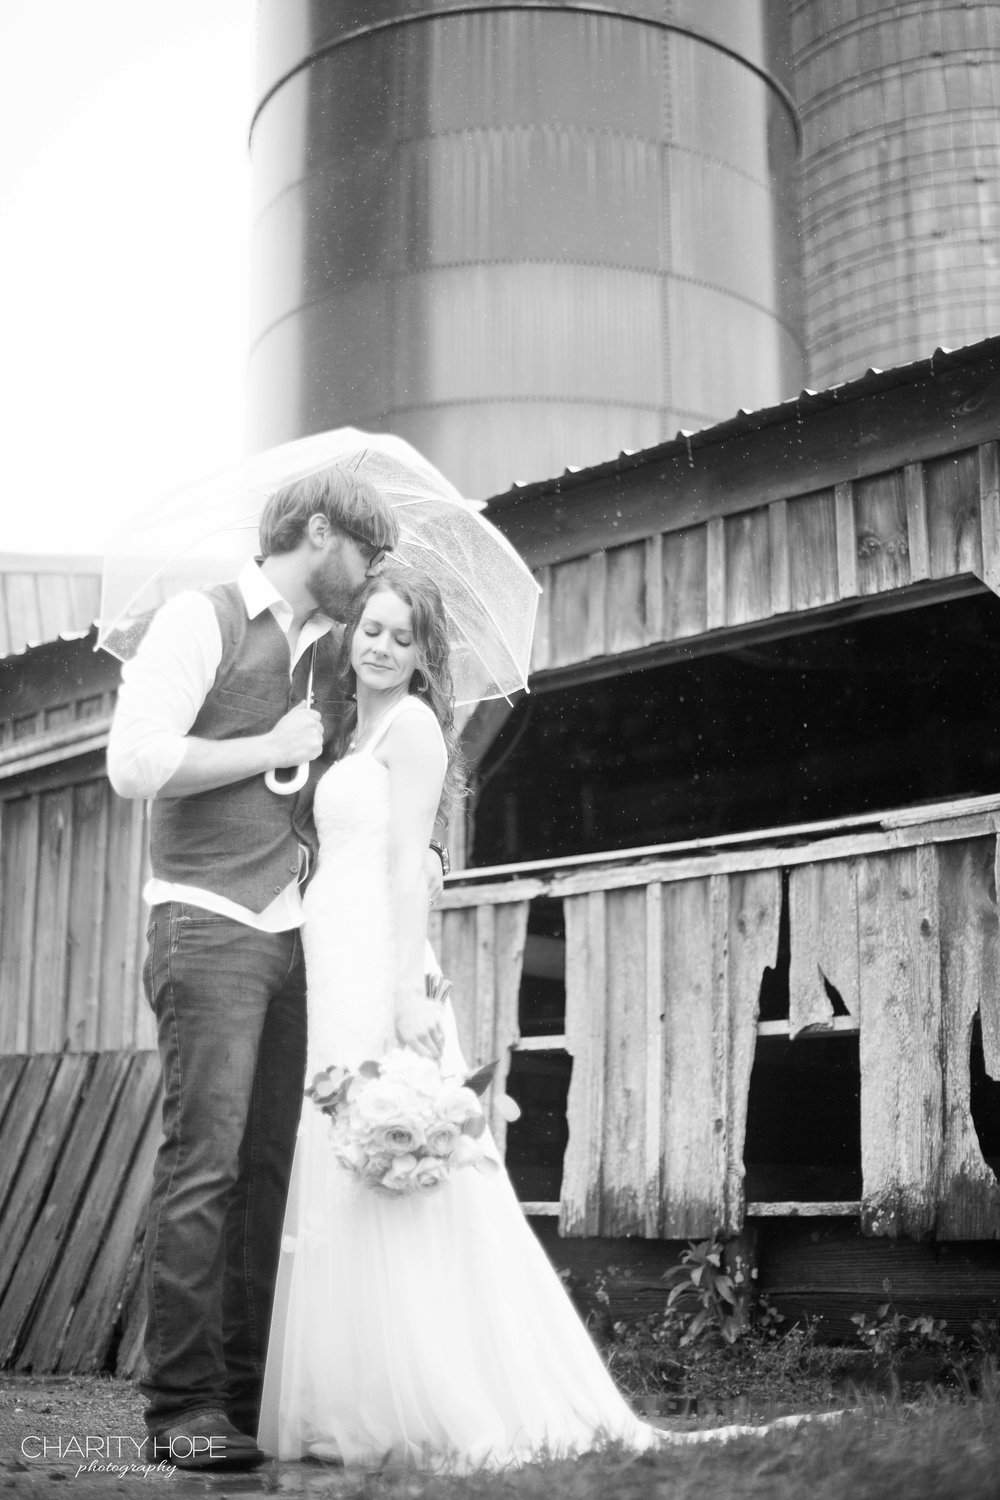  I loved our last few moments together to capture their love, displaying different parts of the farm.  